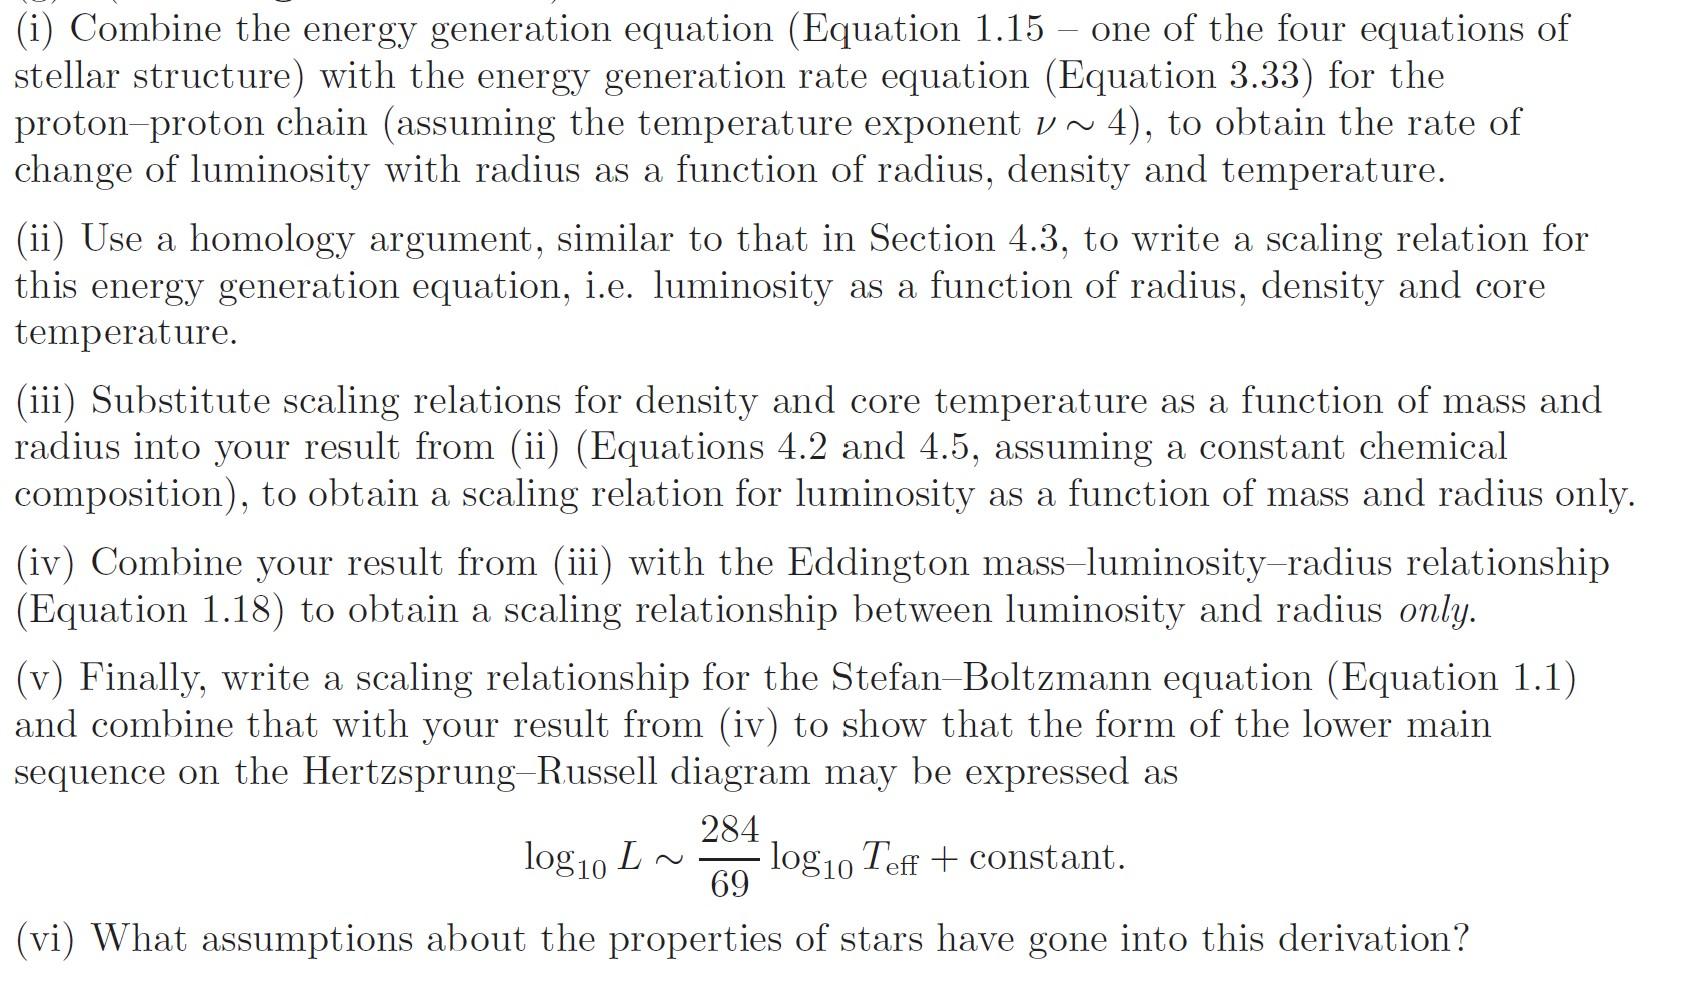 (i) Combine the energy generation equation (Equation 1.15 one of the four equations of stellar structure) with the energy gen